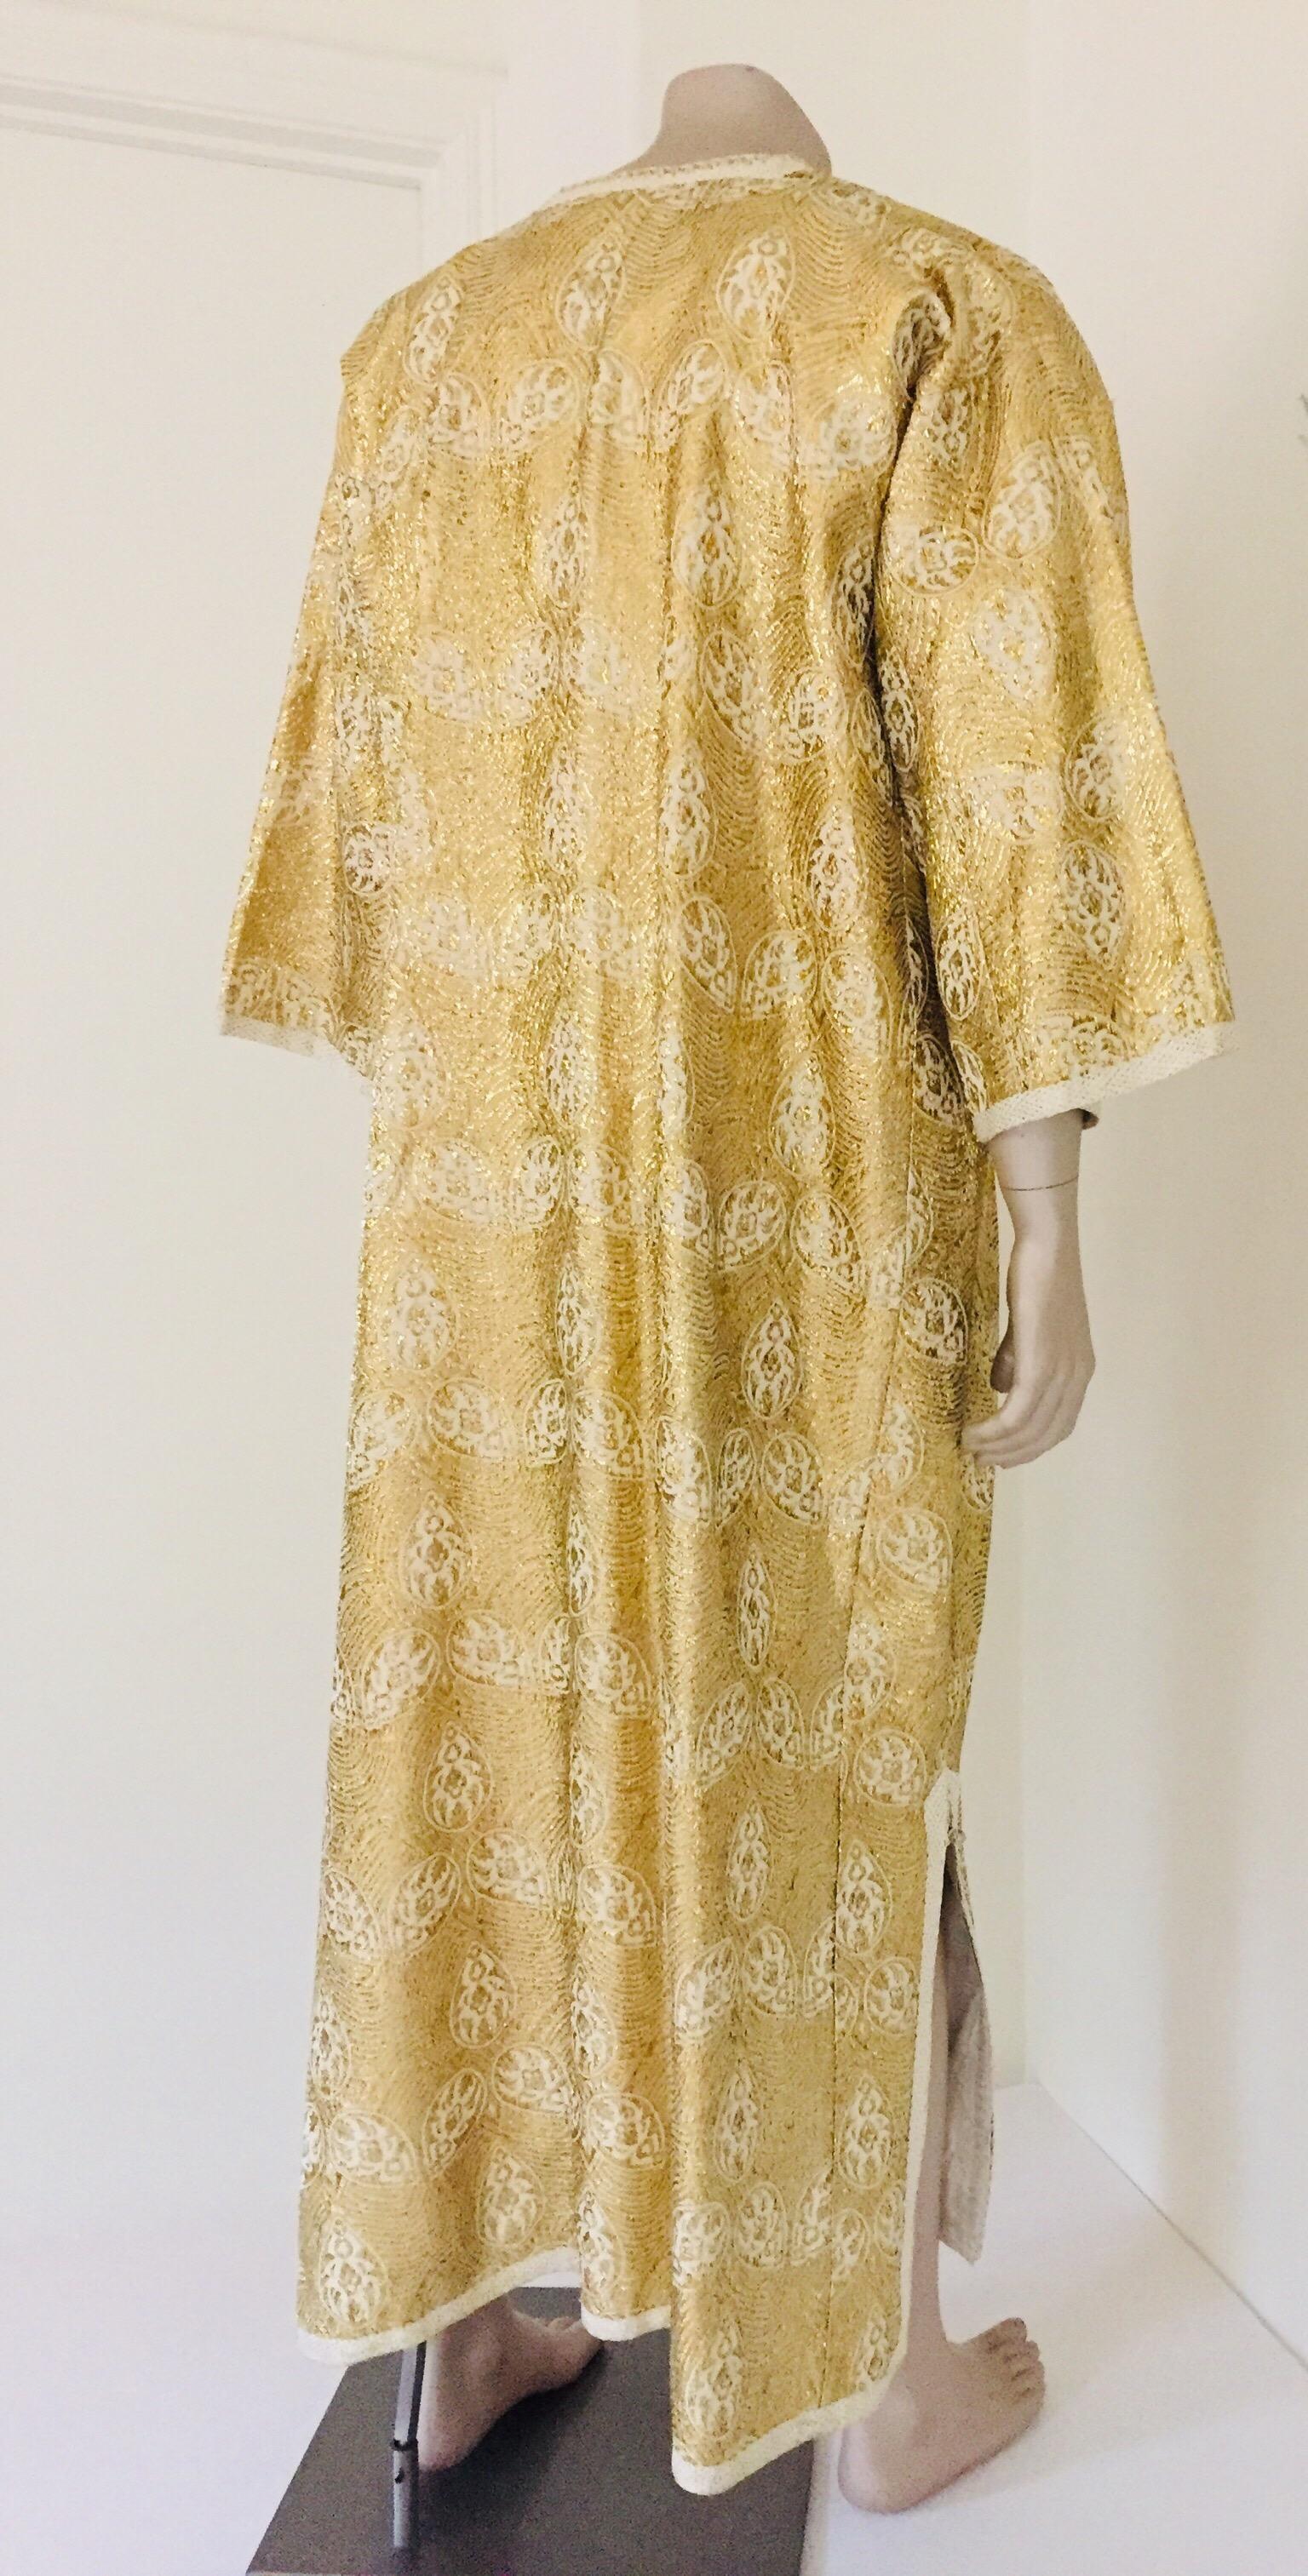 Hand-Crafted Moroccan Caftan in Silver and Gold Brocade Vintage Gentleman Kaftan Circa 1960 For Sale